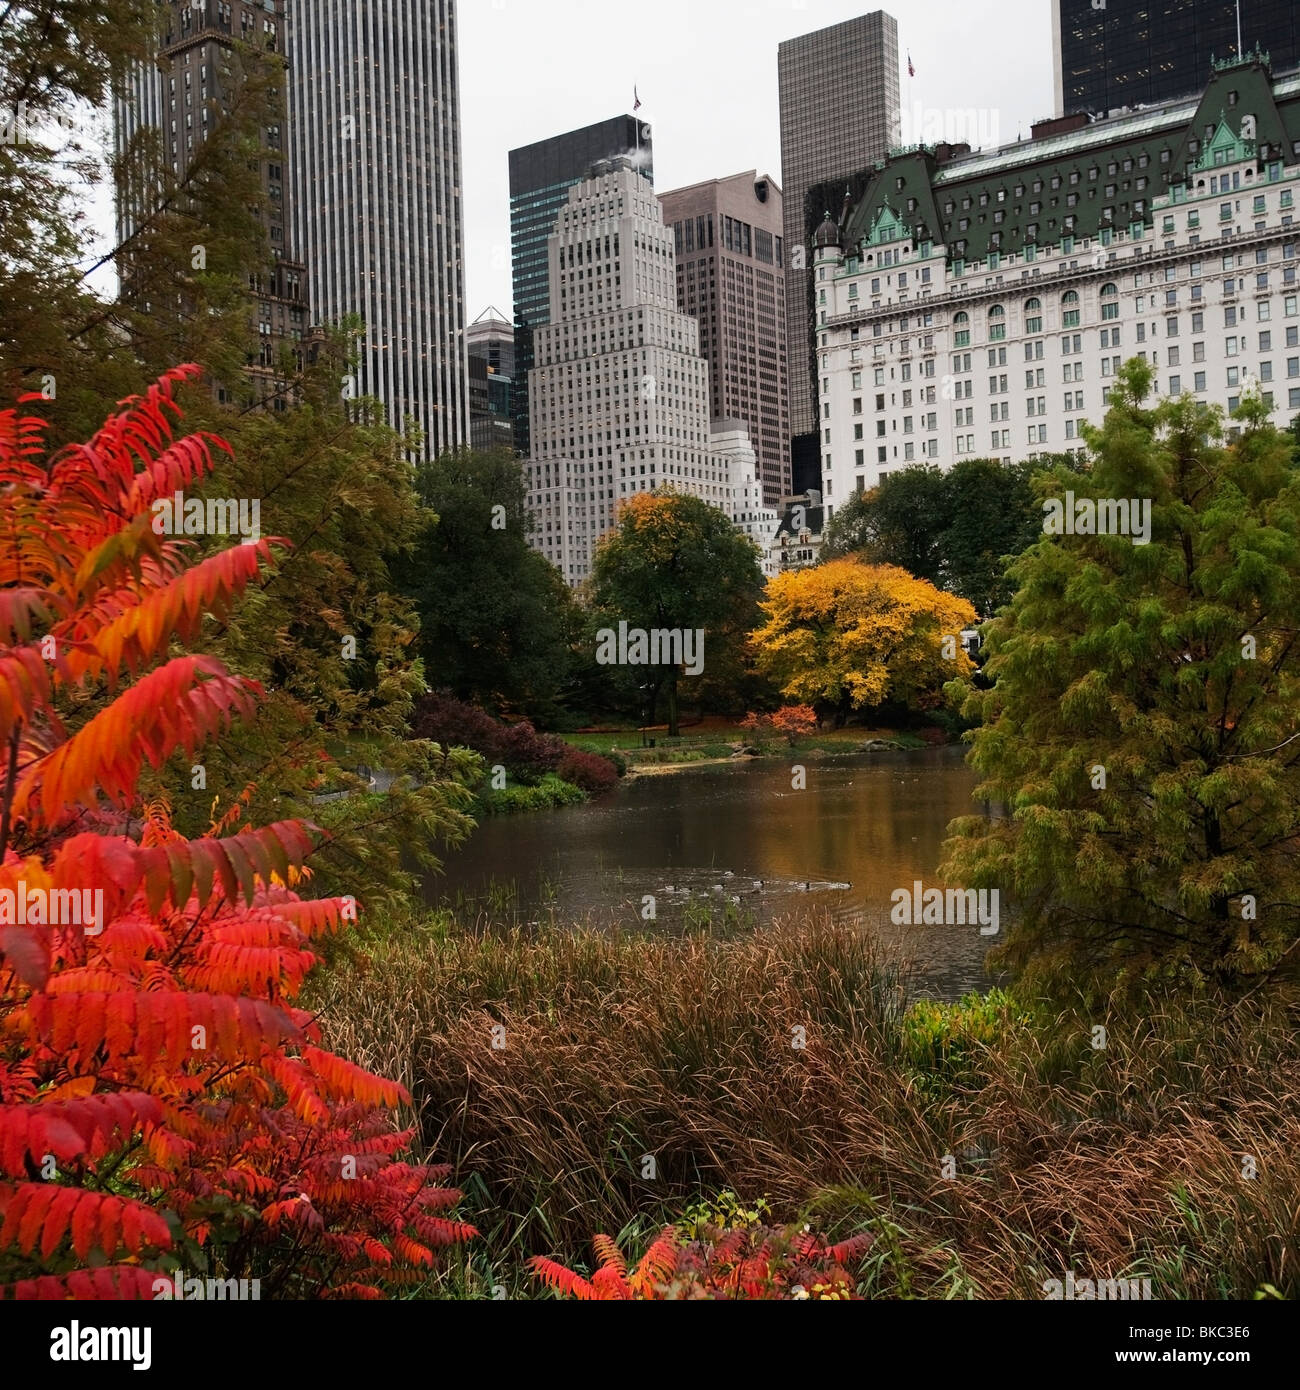 View Of The Buildings On Fifth Avenue From Central Park, New York, United States Of America Stock Photo